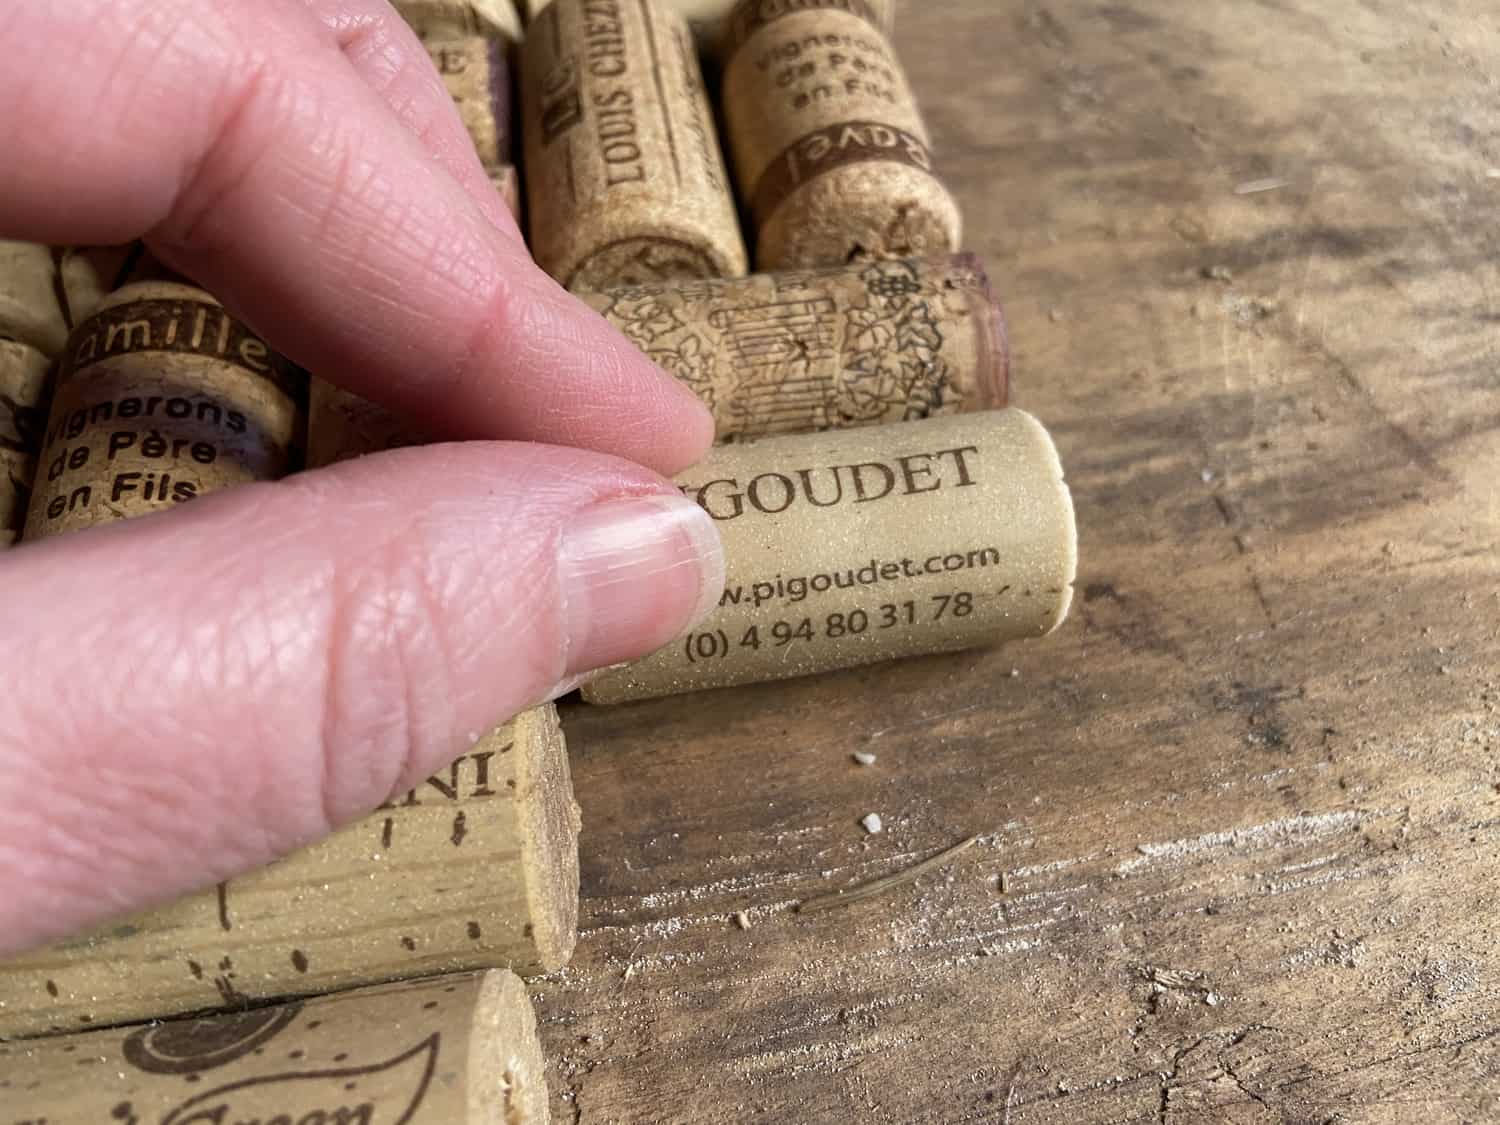 Gluing corks to a piece of wood.